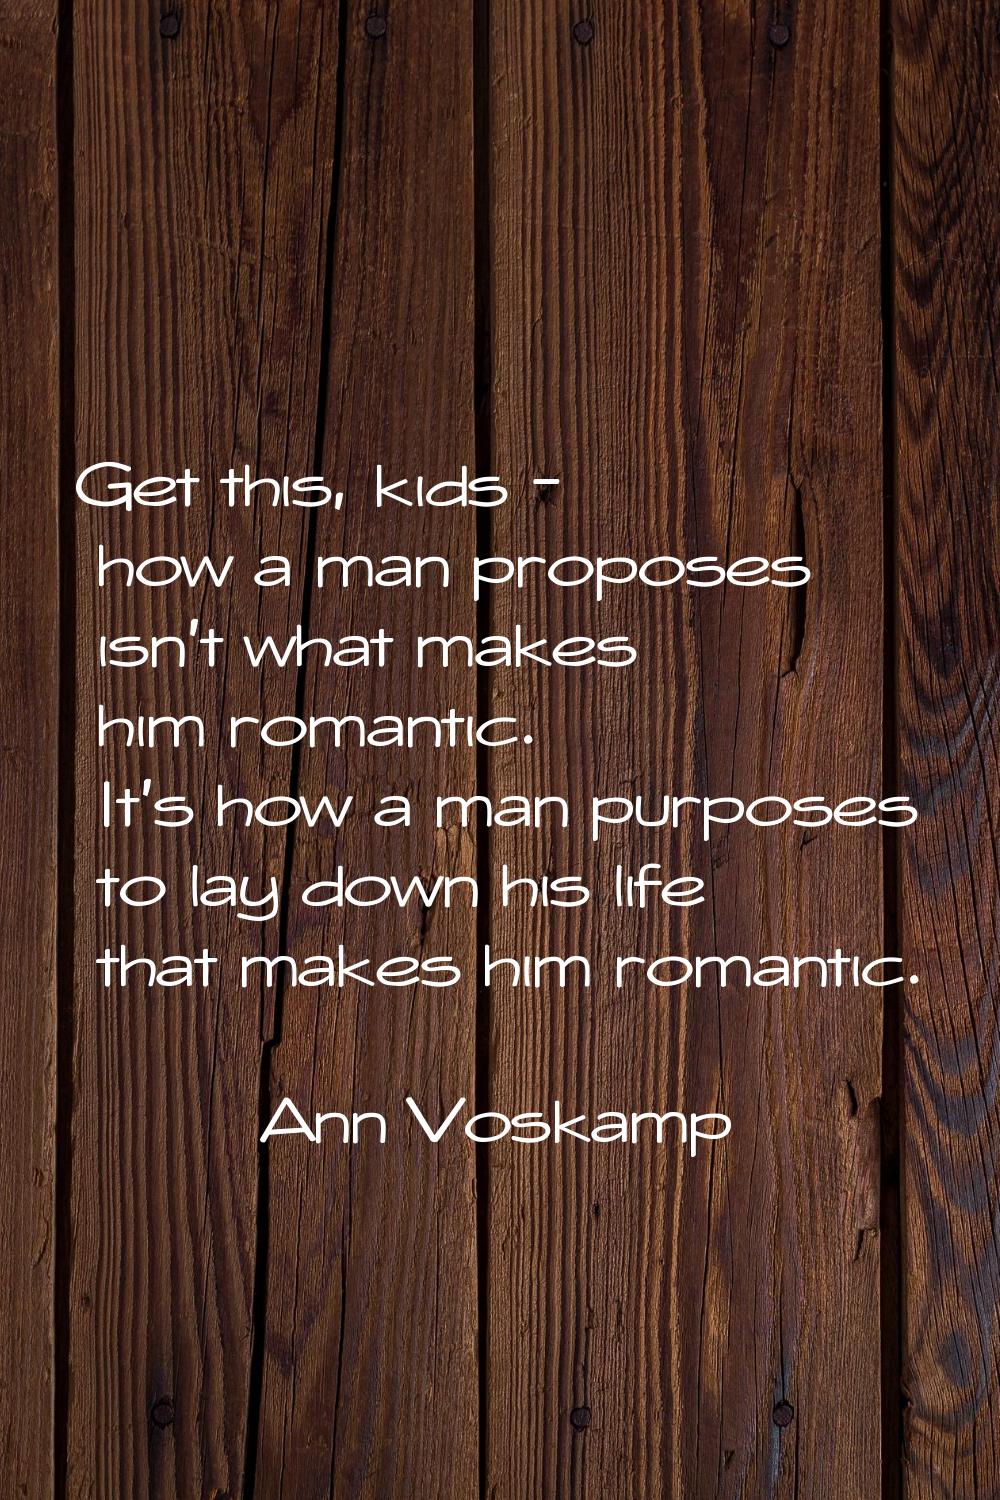 Get this, kids - how a man proposes isn't what makes him romantic. It's how a man purposes to lay d